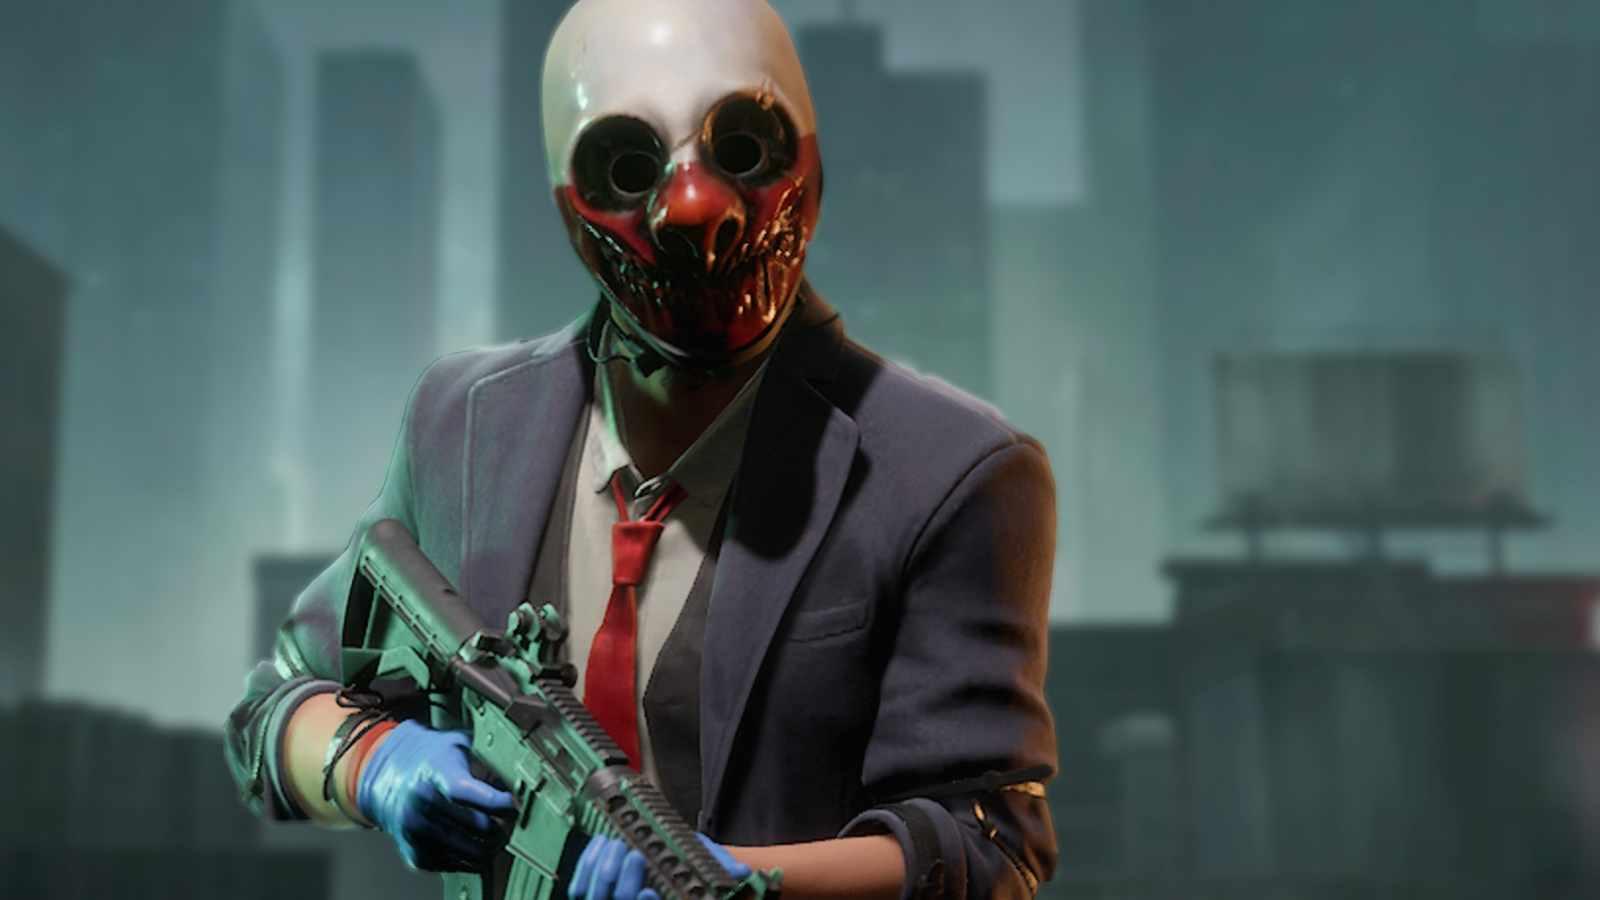 PAYDAY 3 NEWS DROP: CROSSPLAY CONFIRMED, MORE CHARACTERS & *MUCH* MORE! 